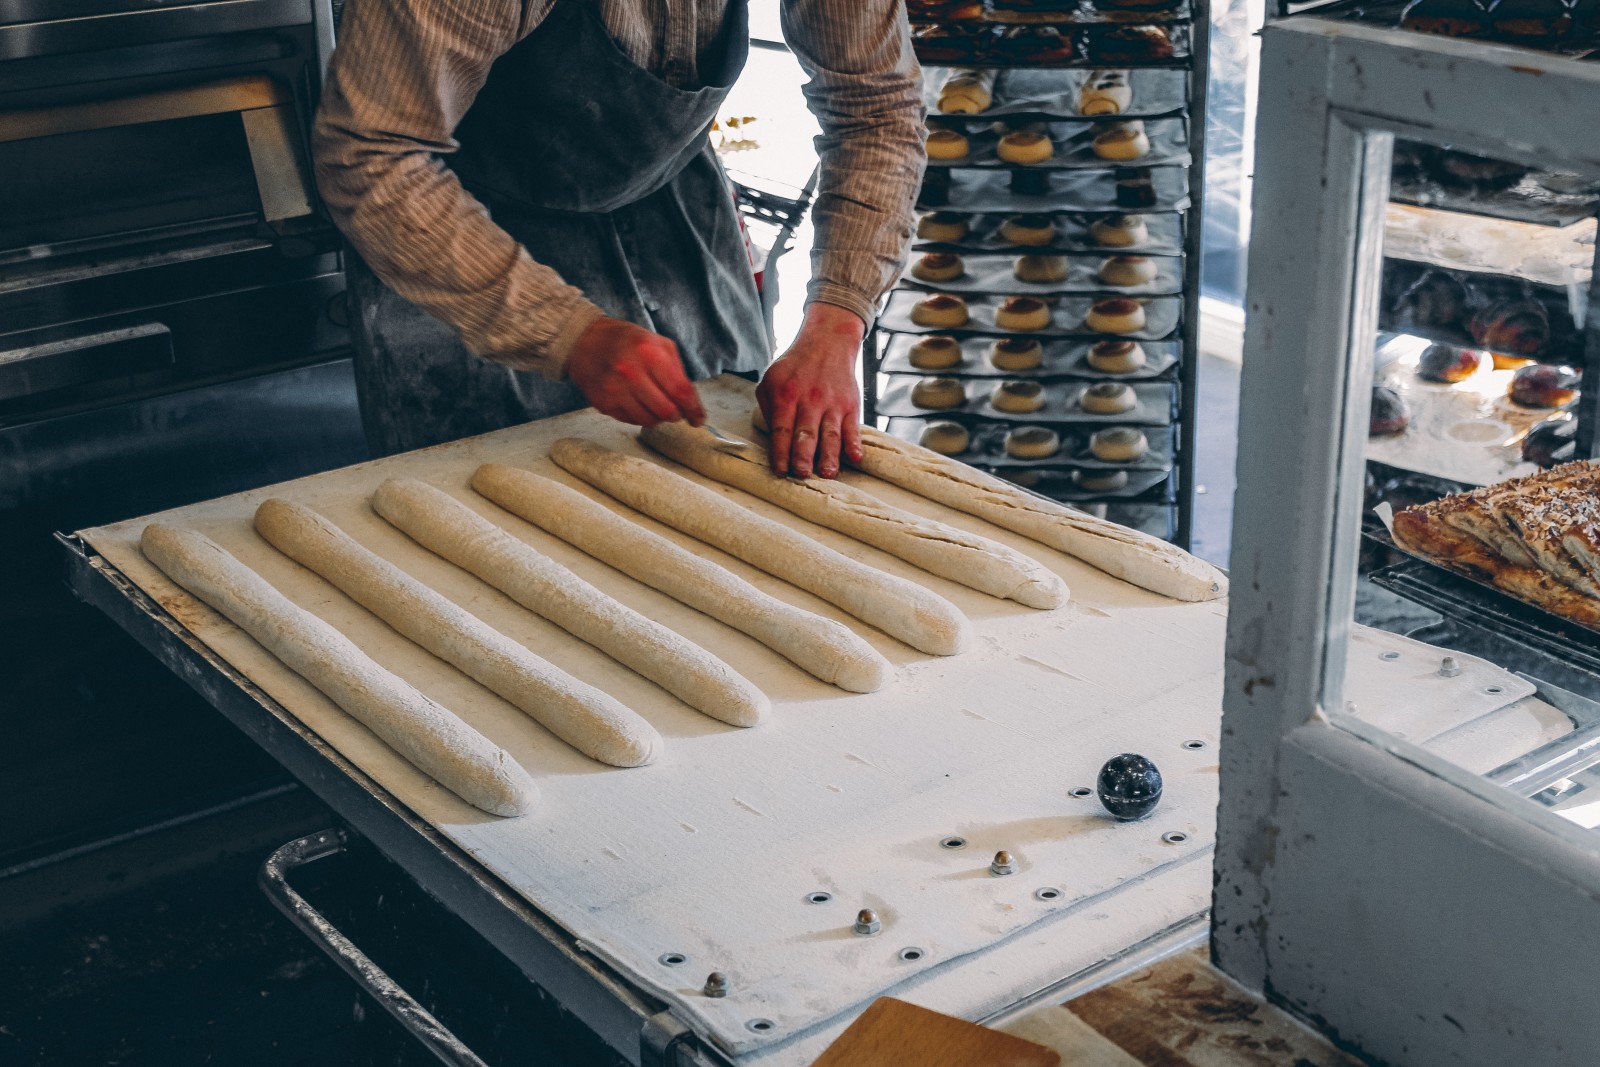 A baker in Iceland working on seven white dough baguettes with red gloves and a blue apron.